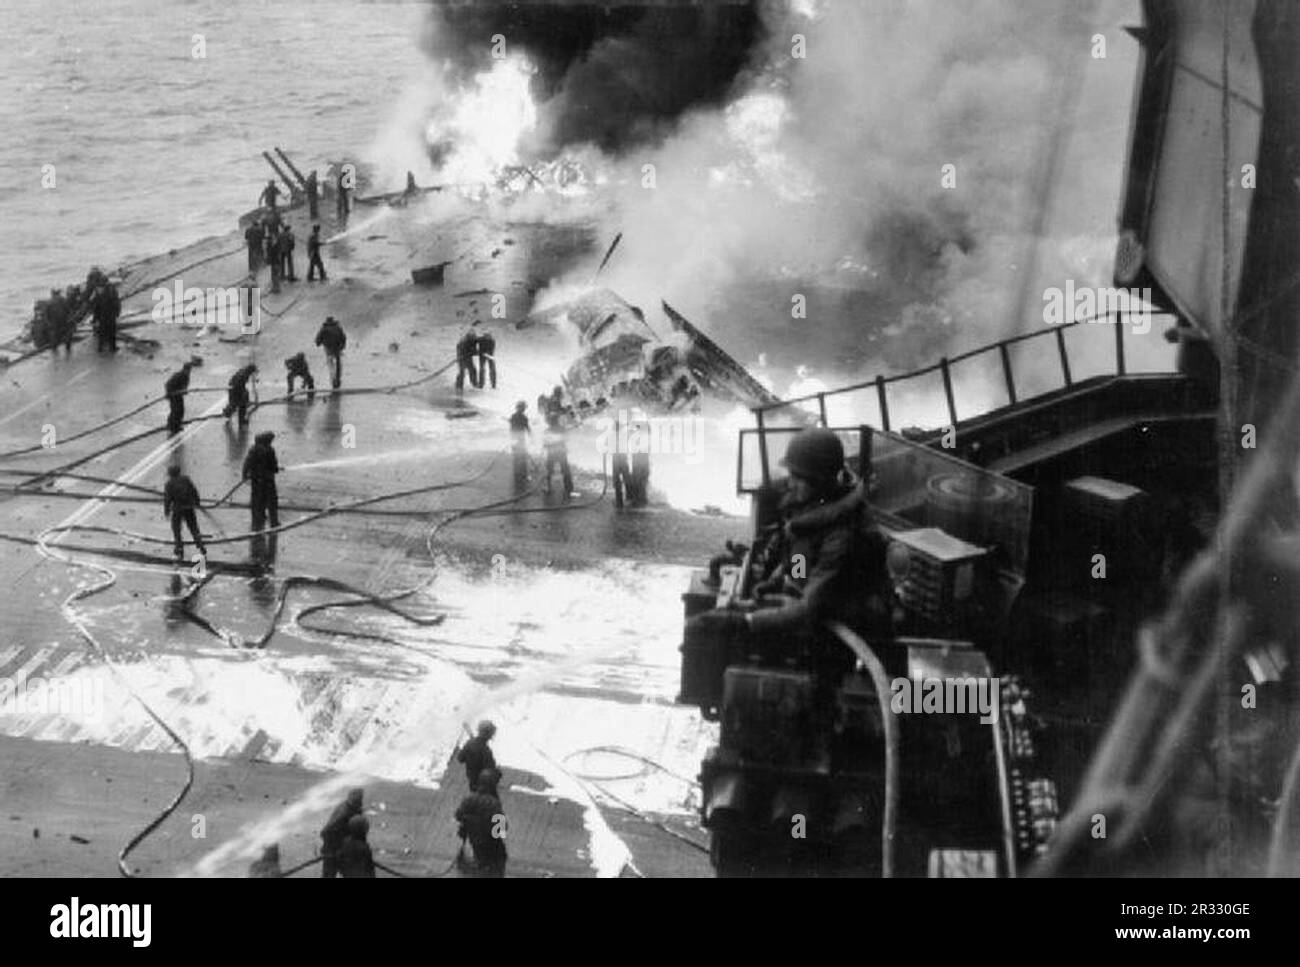 The U.S. Navy aircraft carrier USS Saratoga (CV-3) burning after five 'Kamikaze' suicide planes hit the forward flight deck off Chi-chi Jima, shortly after 17:00h, 21 February 1945. Another attack at 19:00h scored an additional bomb hit. 123 of her crew were dead or missing as a result of the attacks. Stock Photo